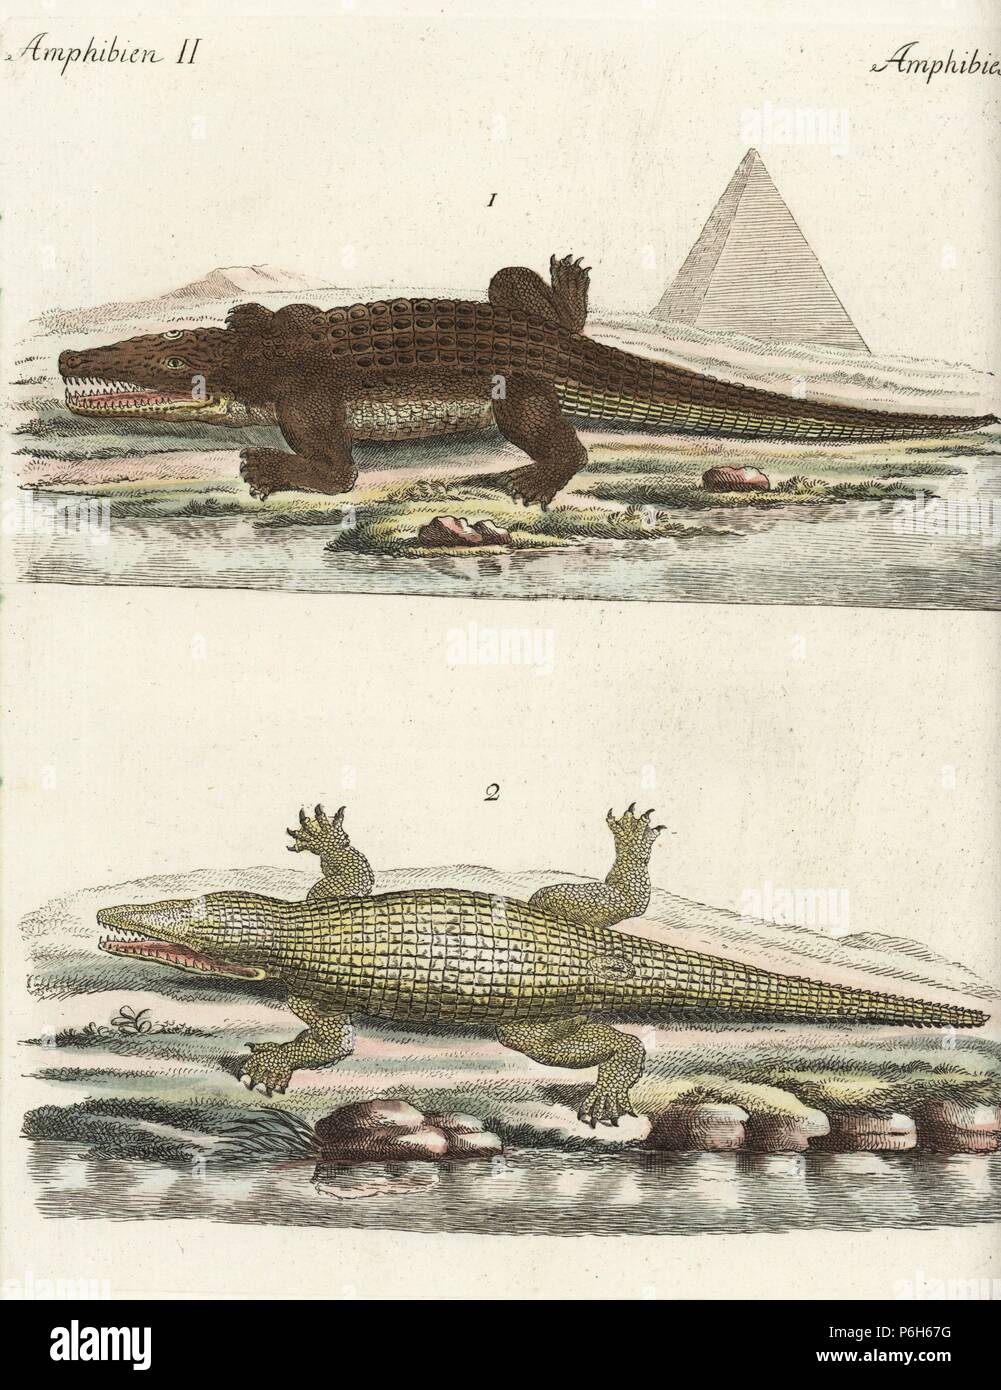 Nile crocodile, Crocodylus niloticus, male 1 and female 2, in front of an Egyptian pyramid. Handcoloured copperplate engraving from Friedrich Johann Bertuch's 'Bilderbuch fur Kinder' (Picture Book for Children), Weimar, 1792. Stock Photo